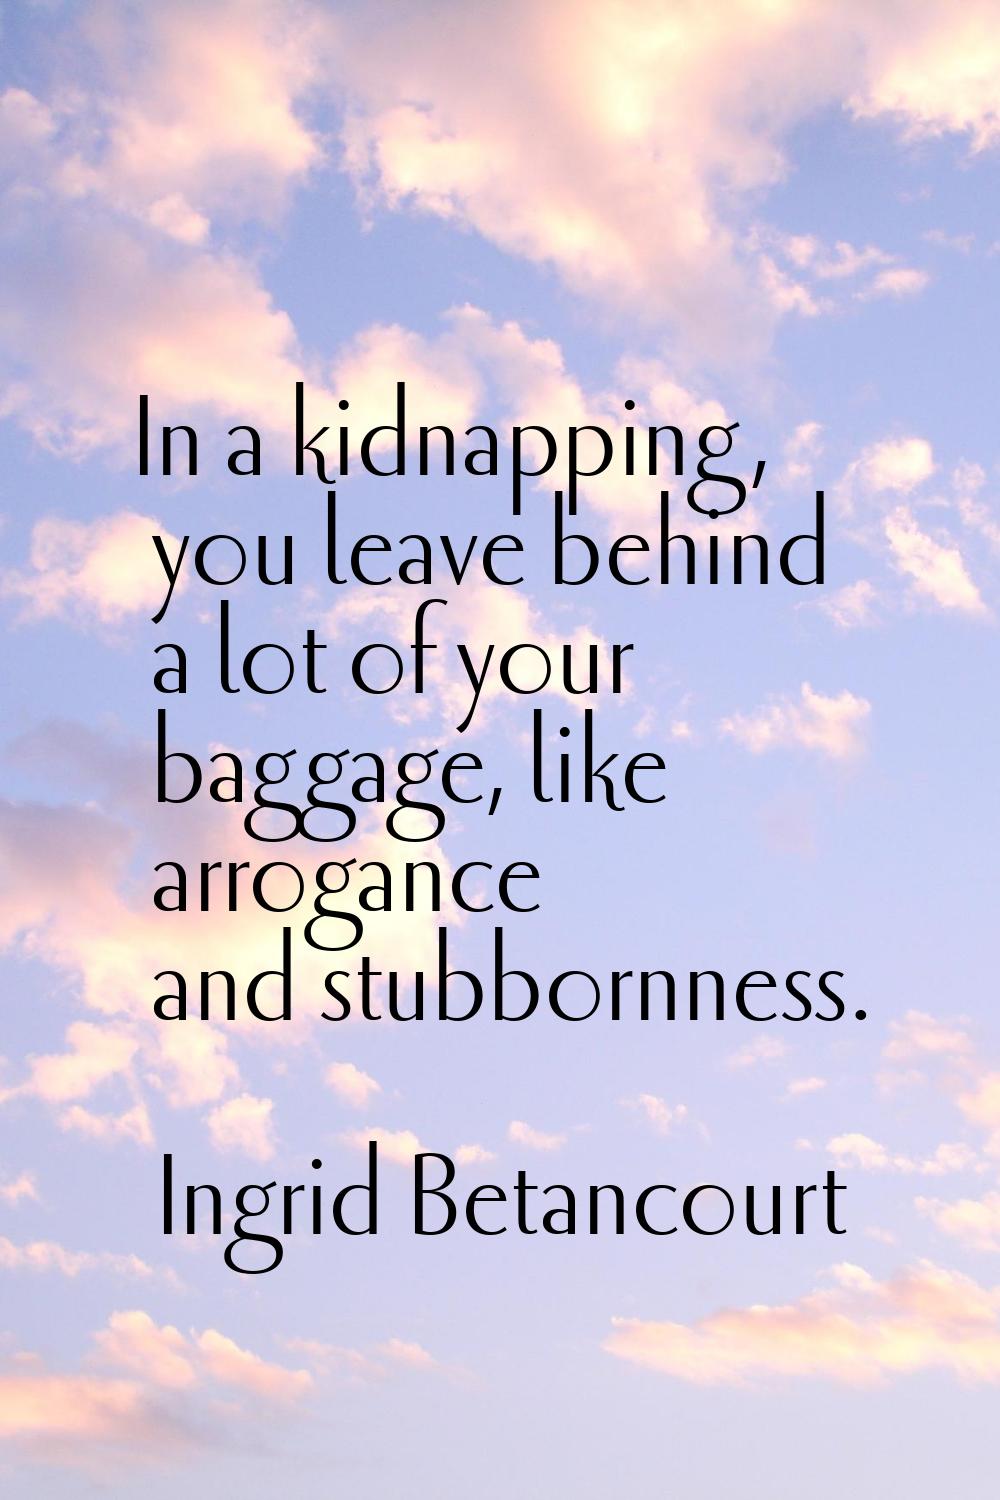 In a kidnapping, you leave behind a lot of your baggage, like arrogance and stubbornness.